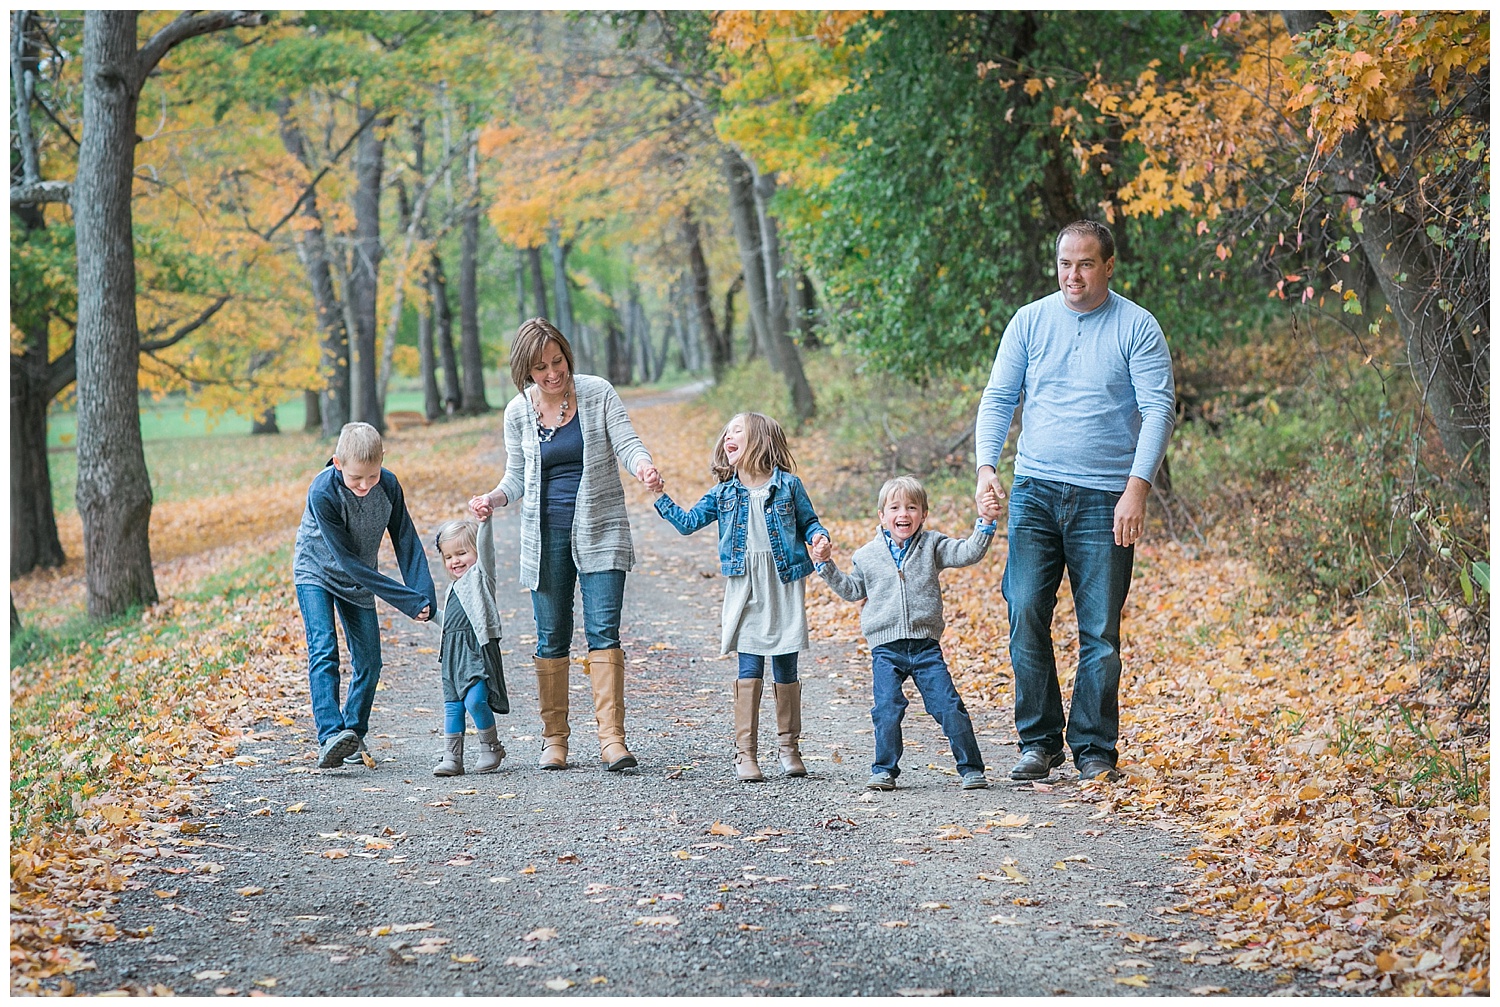 The Schurr family session at Letchworth state park - Whimsy roots photography 37.jpg